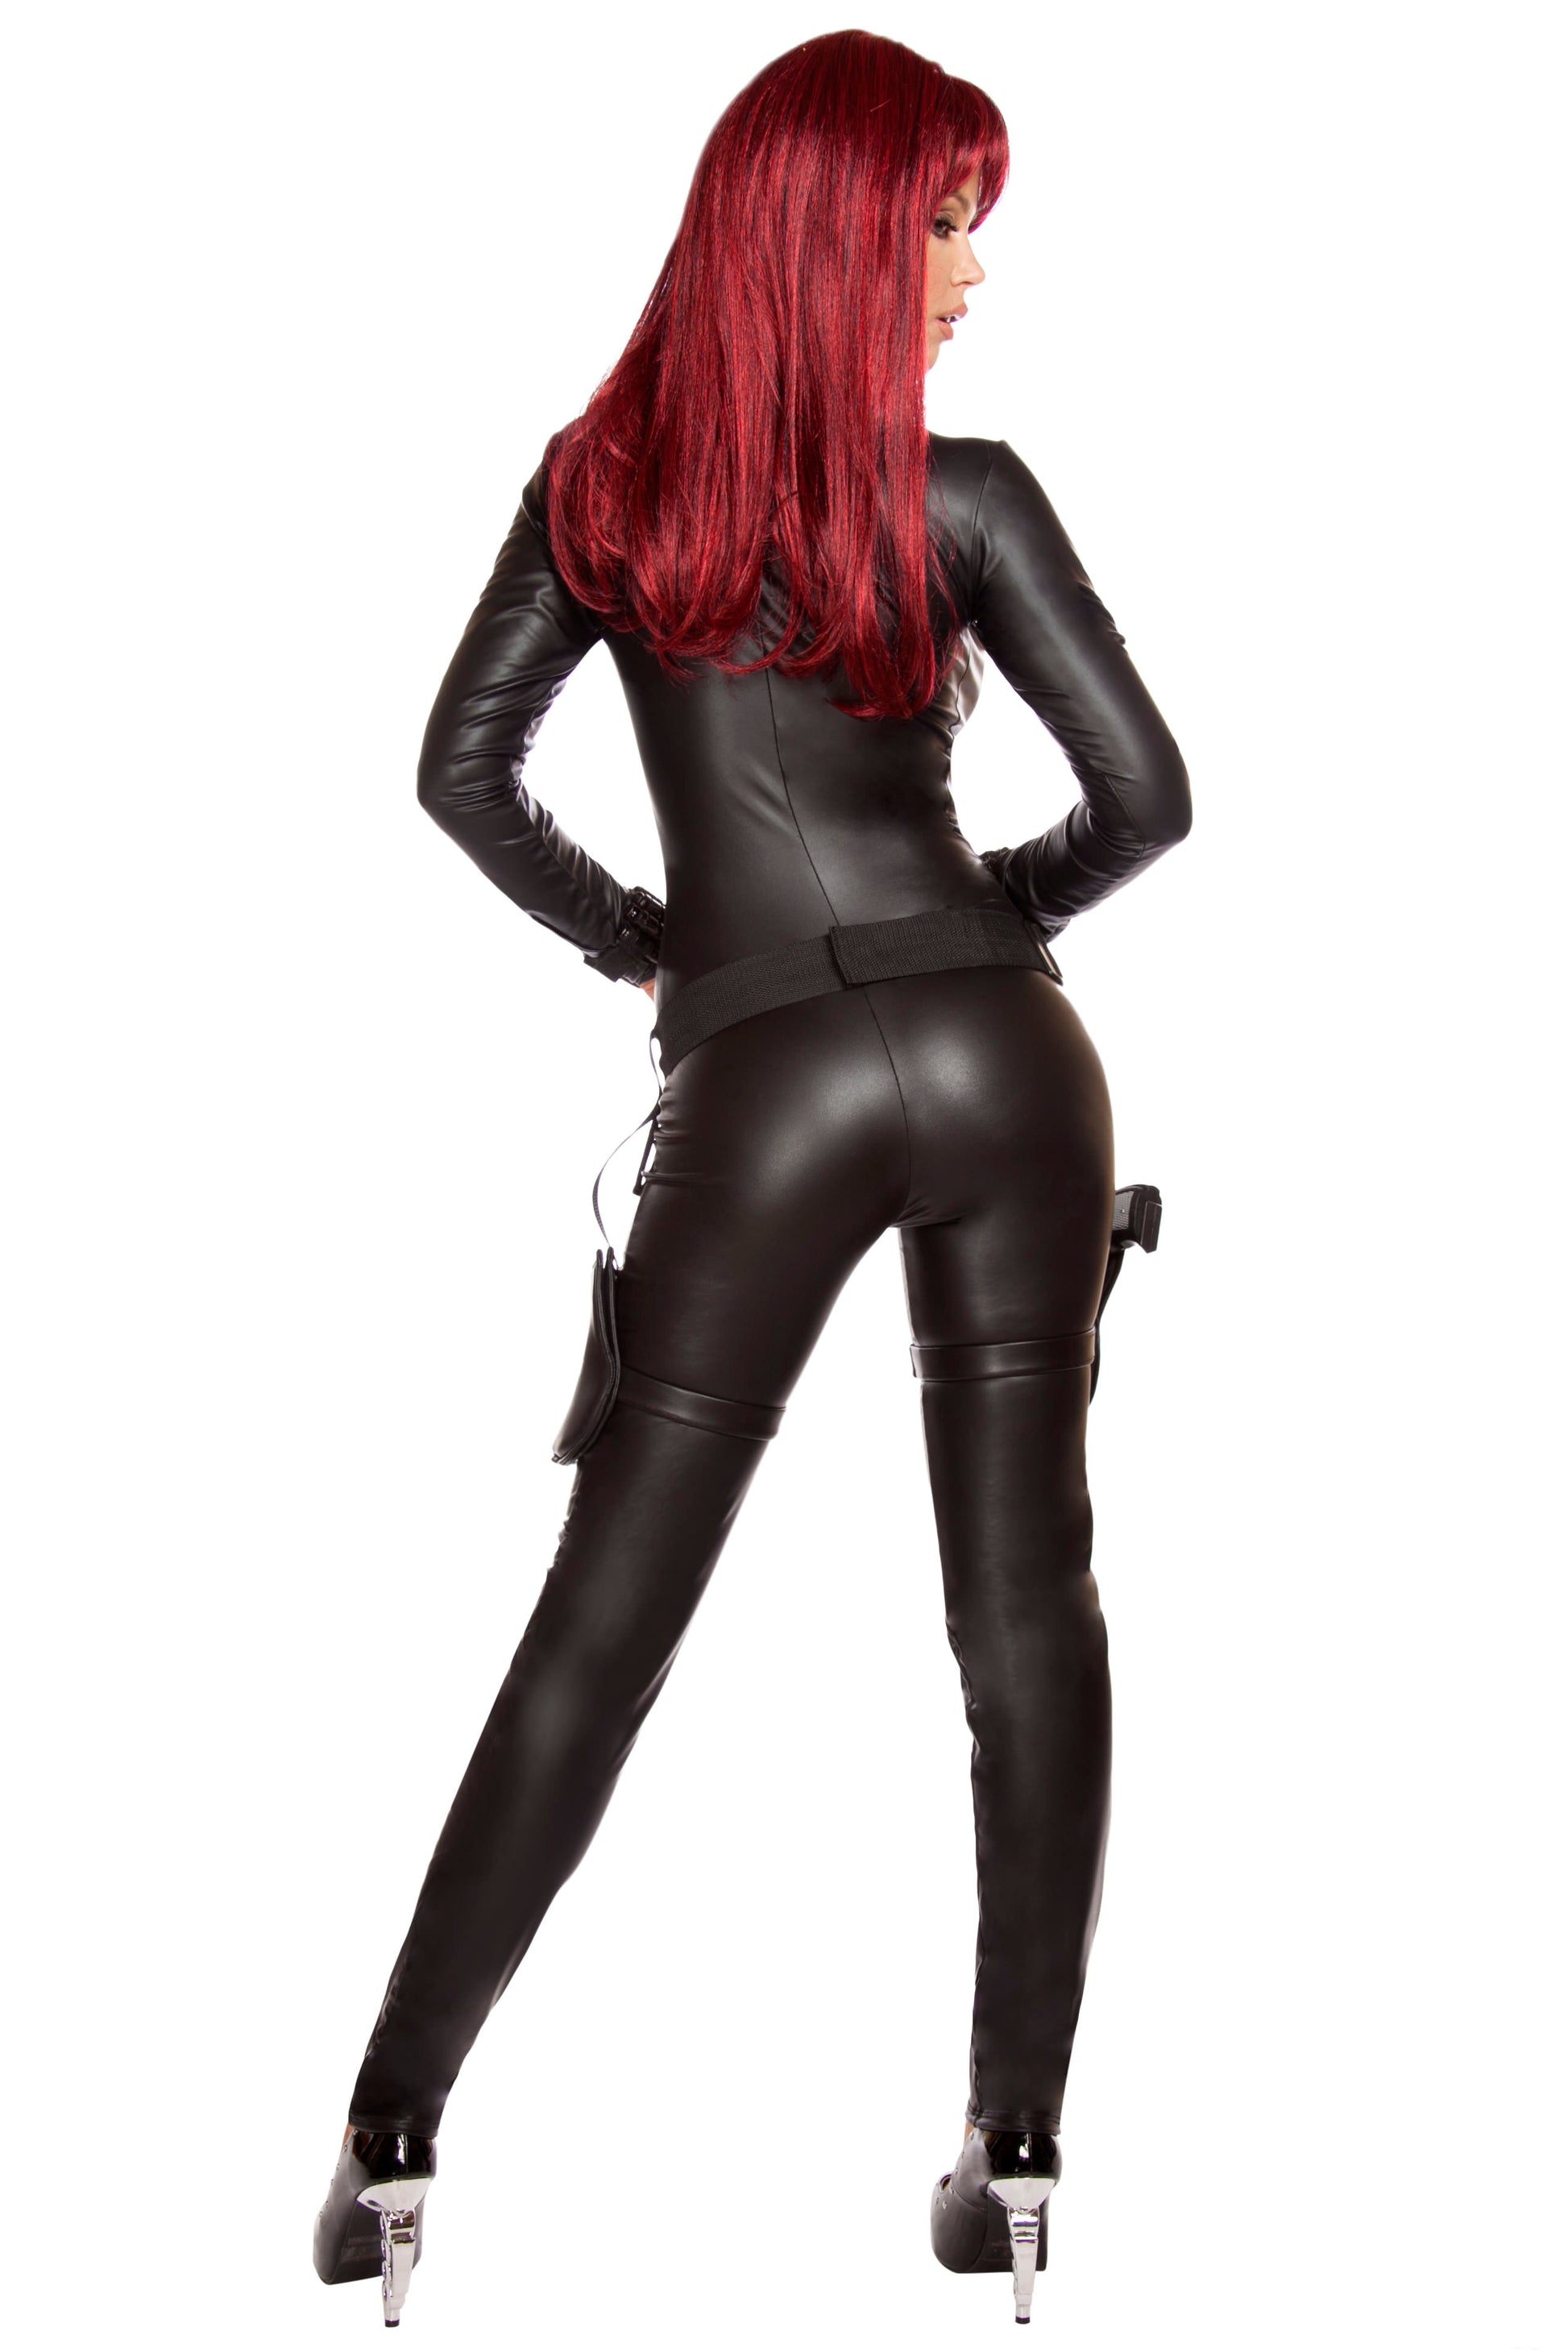 Black Widow Costume by ROMA in Size S, M, or L